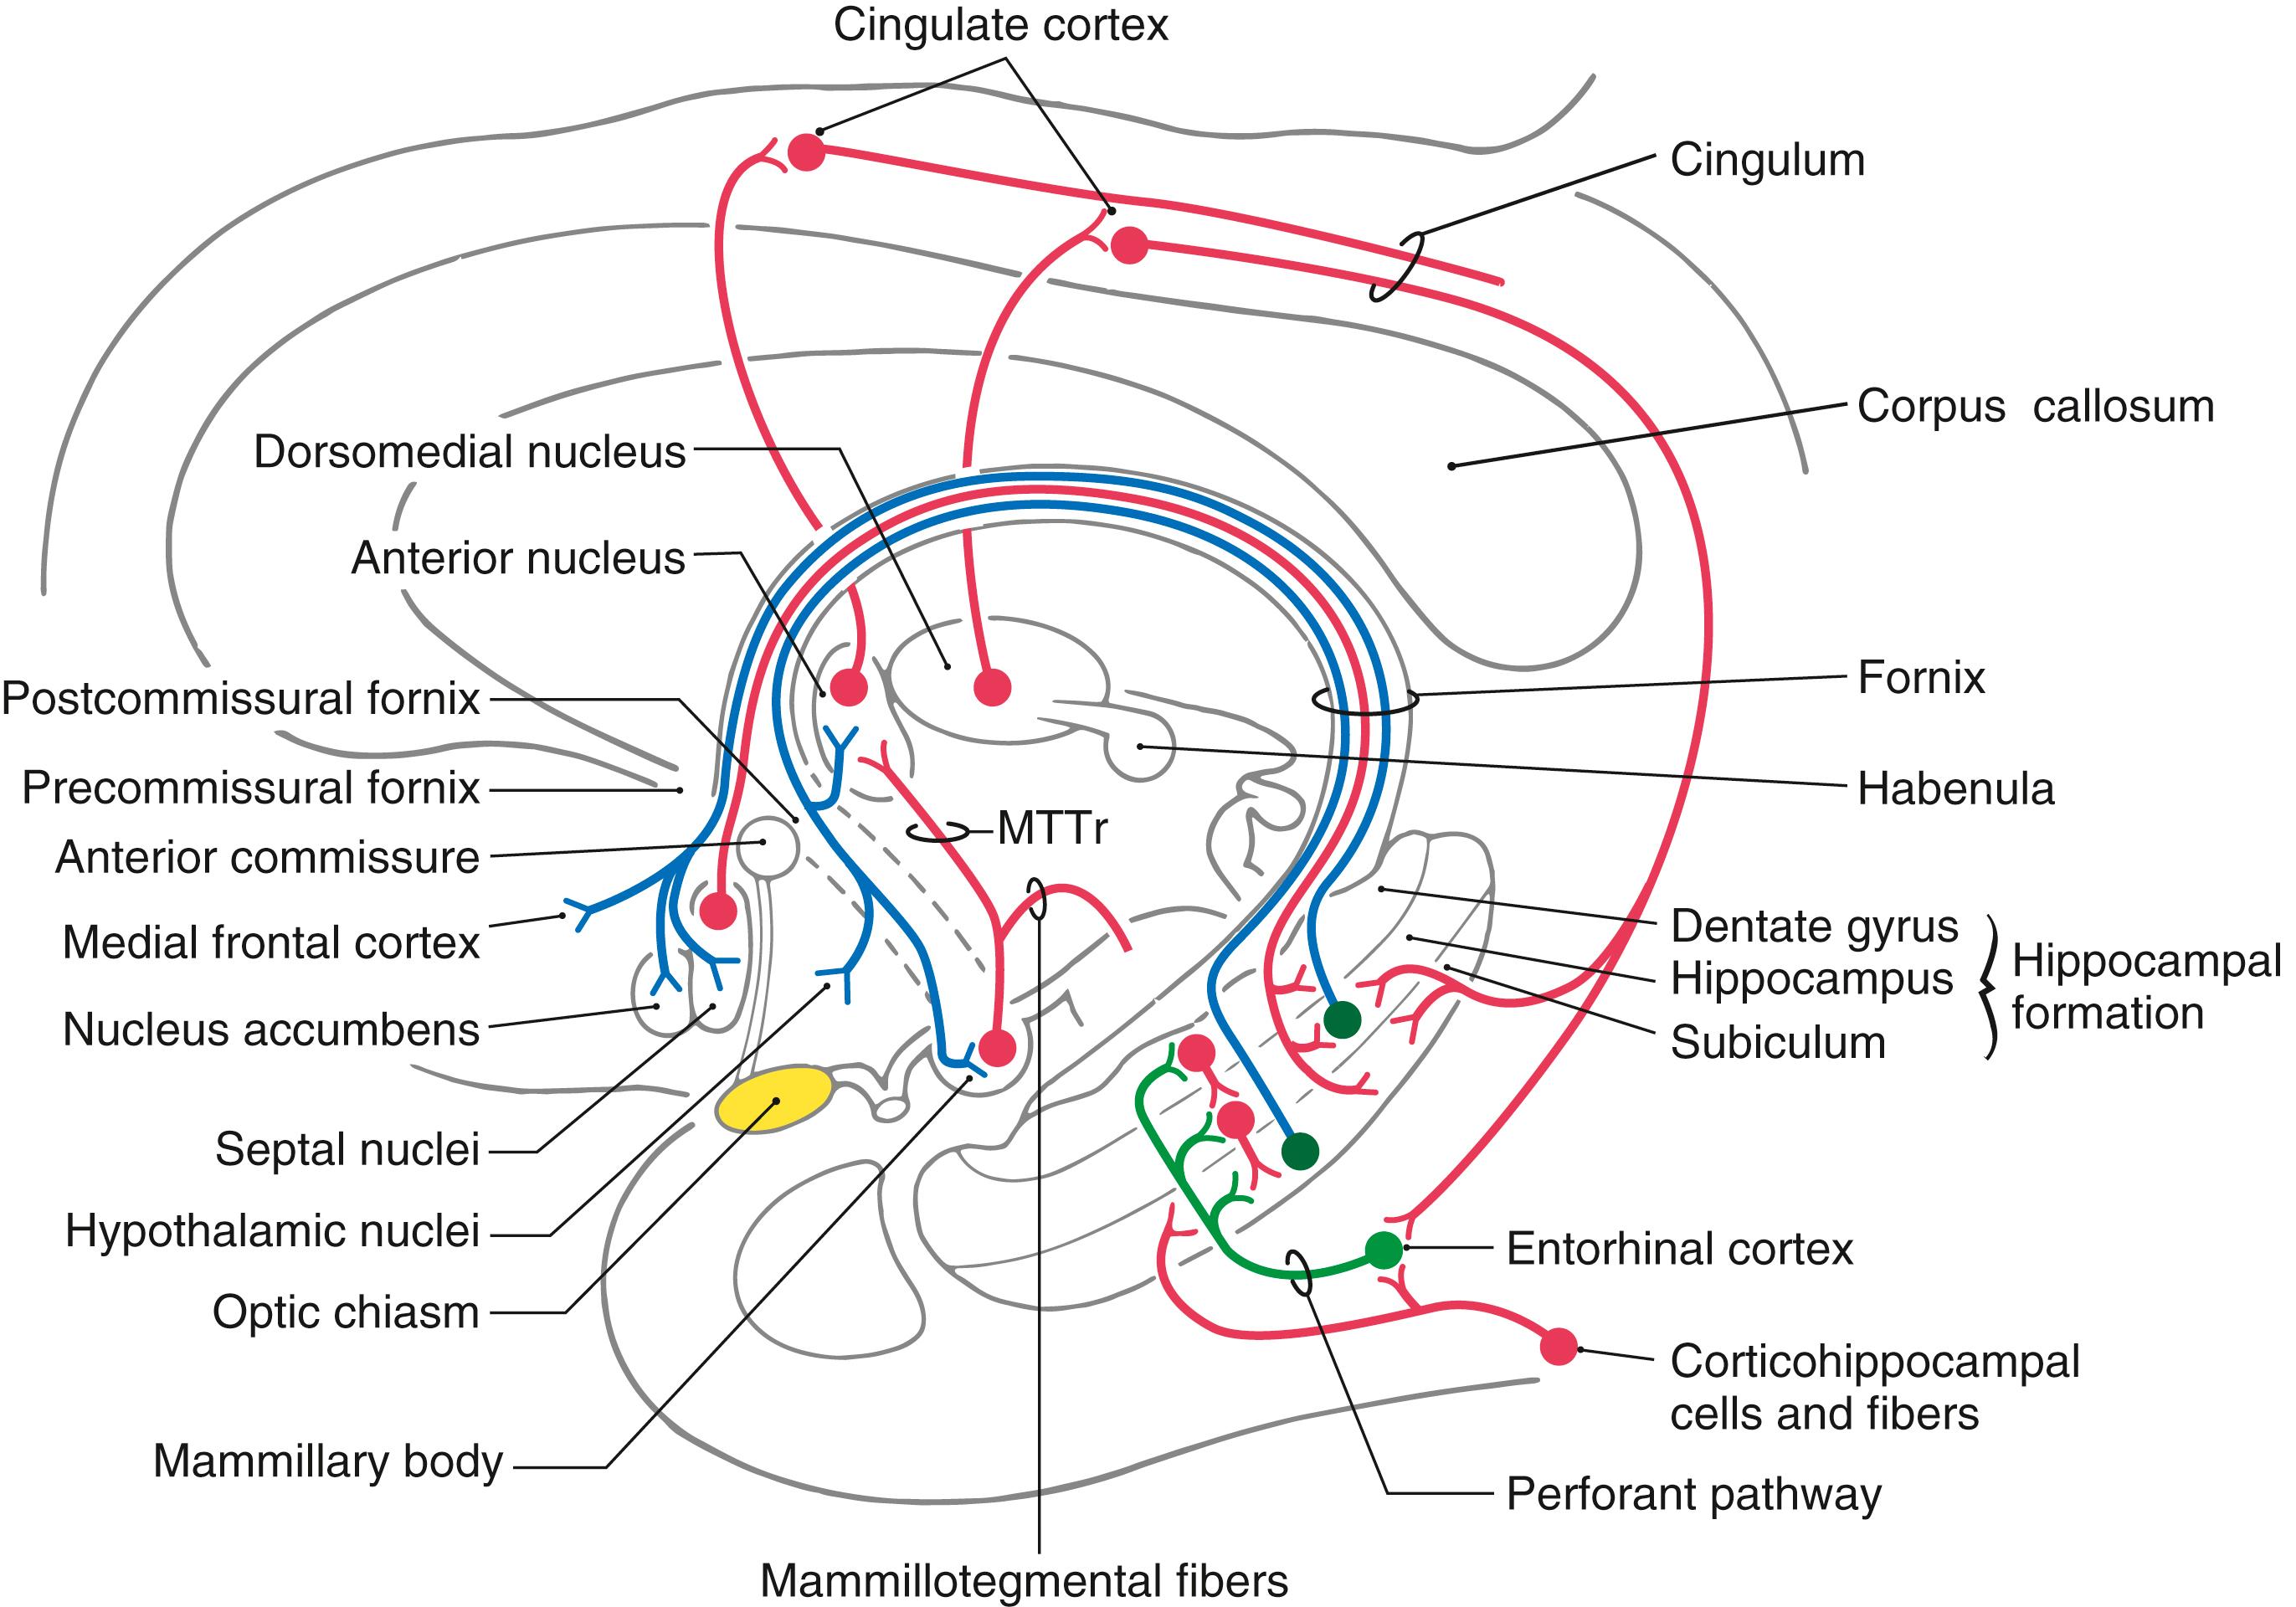 Fig. 31.5, Semidiagrammatic representation of afferent and efferent connections of the hippocampal formation. MTTr, mammillothalamic tract.